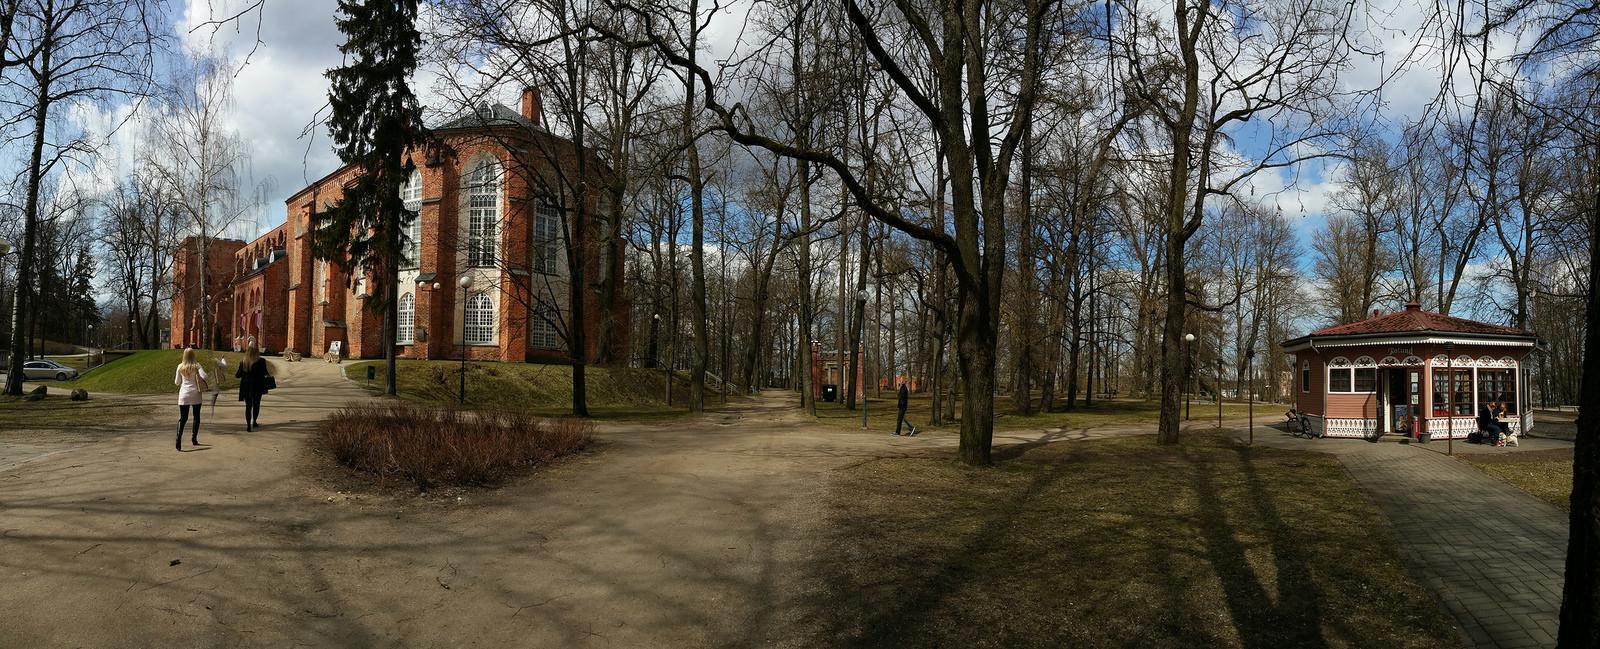 Tartu as UNESCO's City of Literature – a guided literary walk, Toome Hill